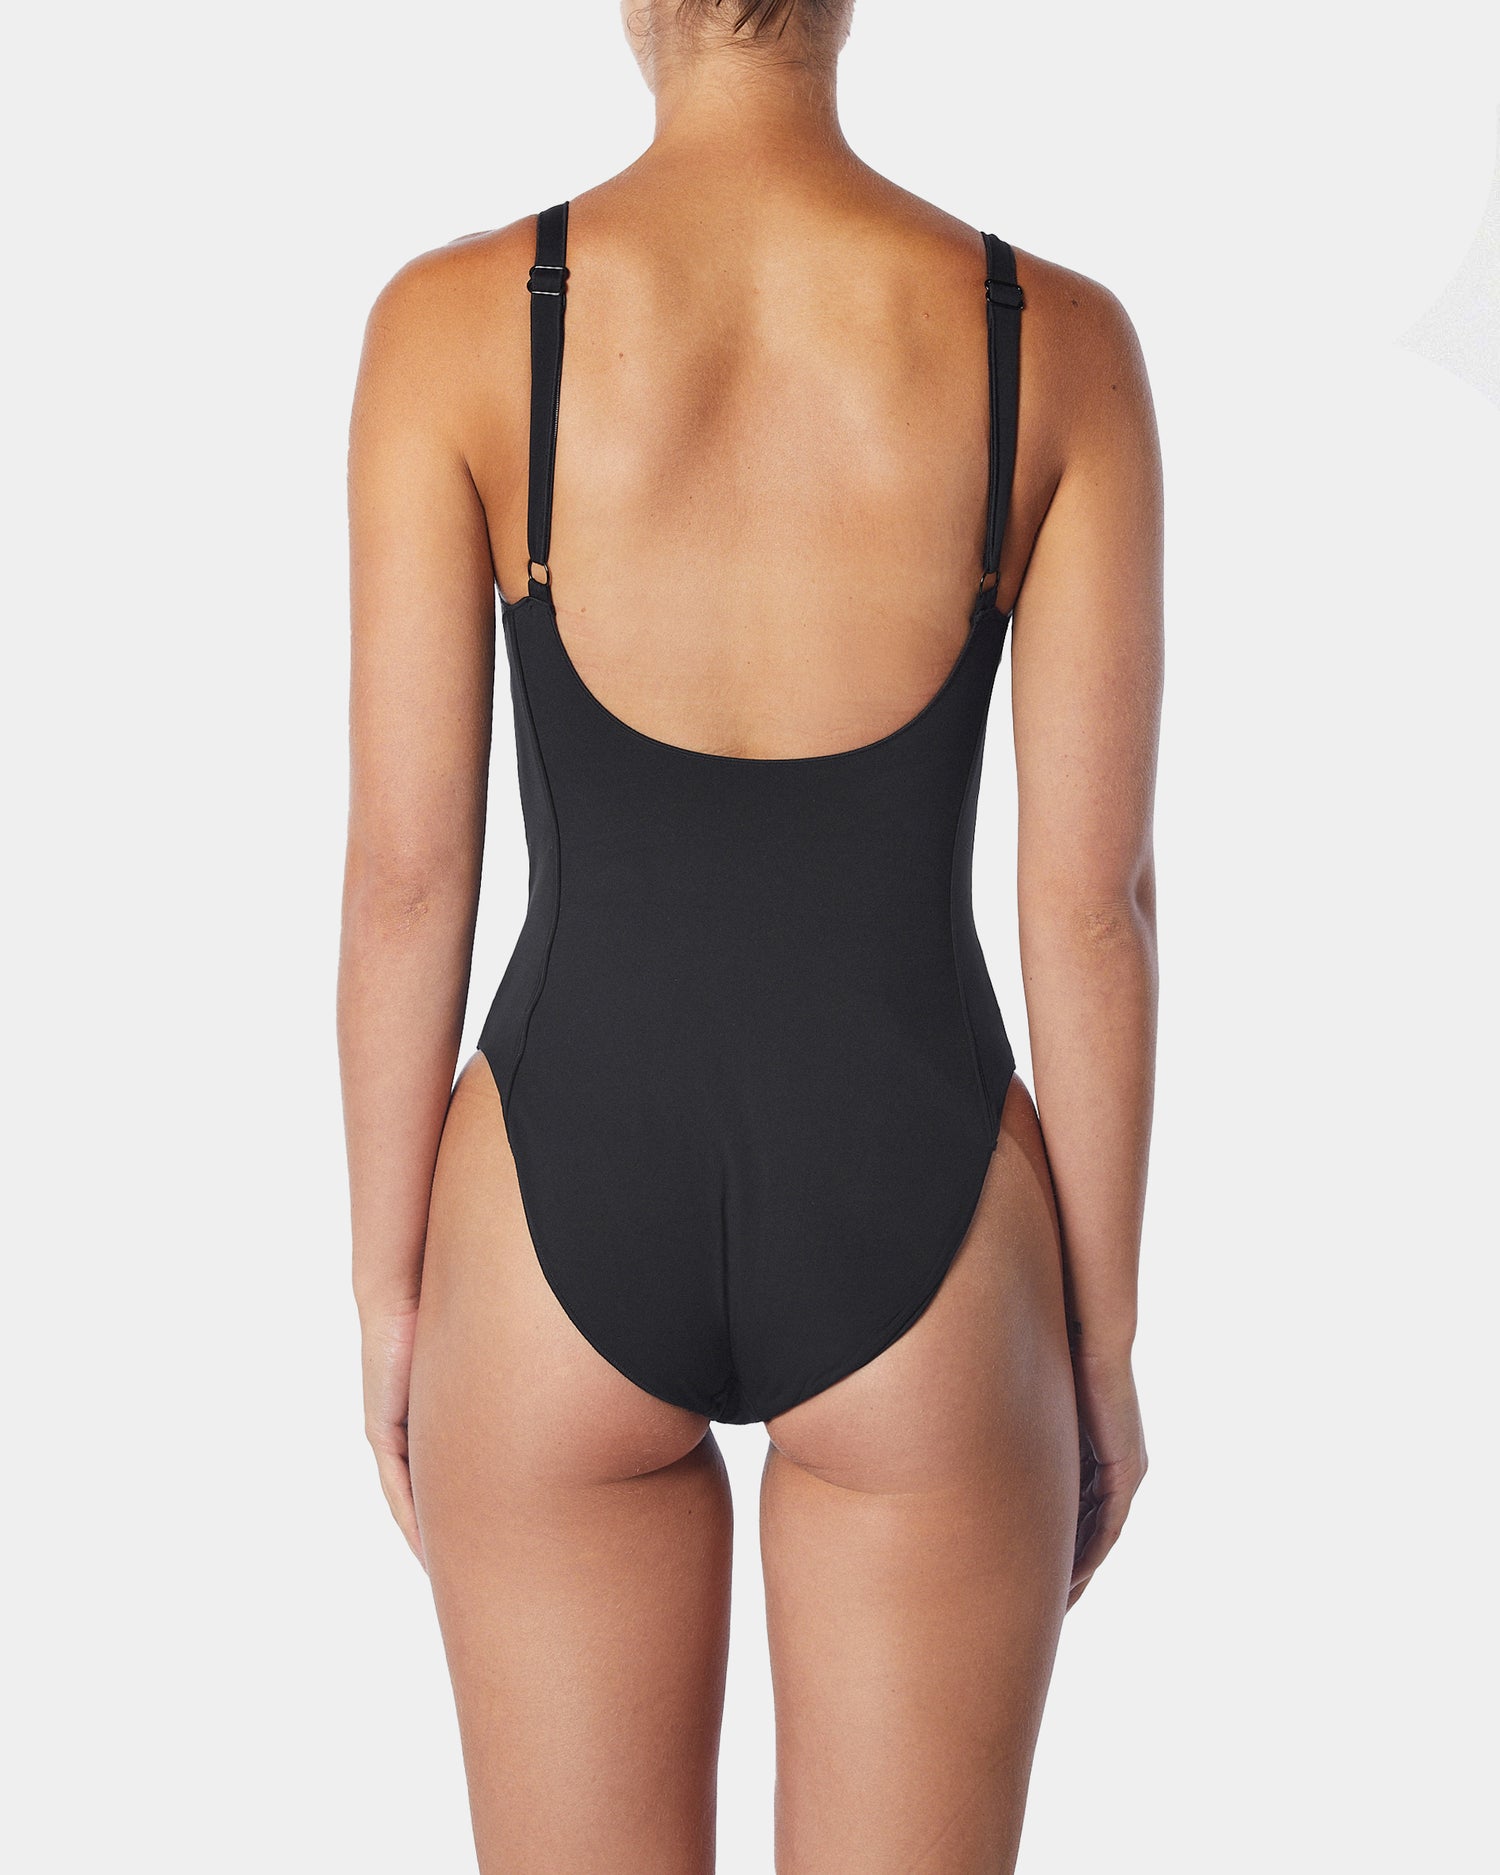 The Outline One Piece - Black